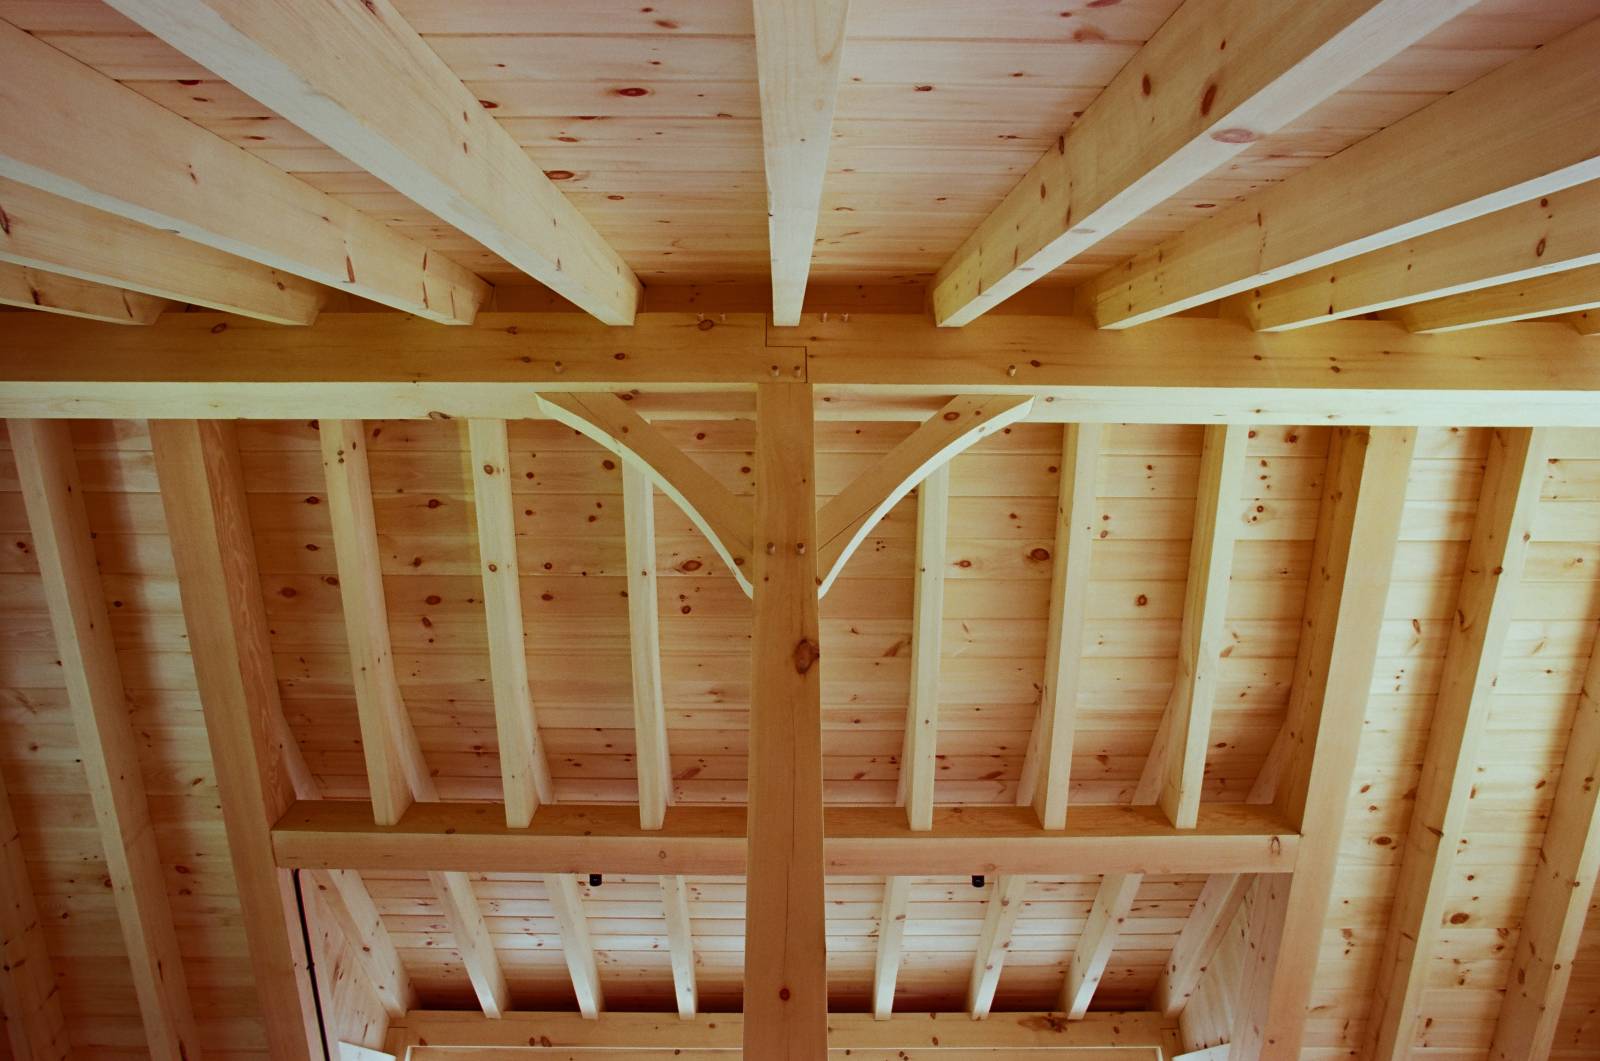 Looking up at the structural ridge beam and timber rafters